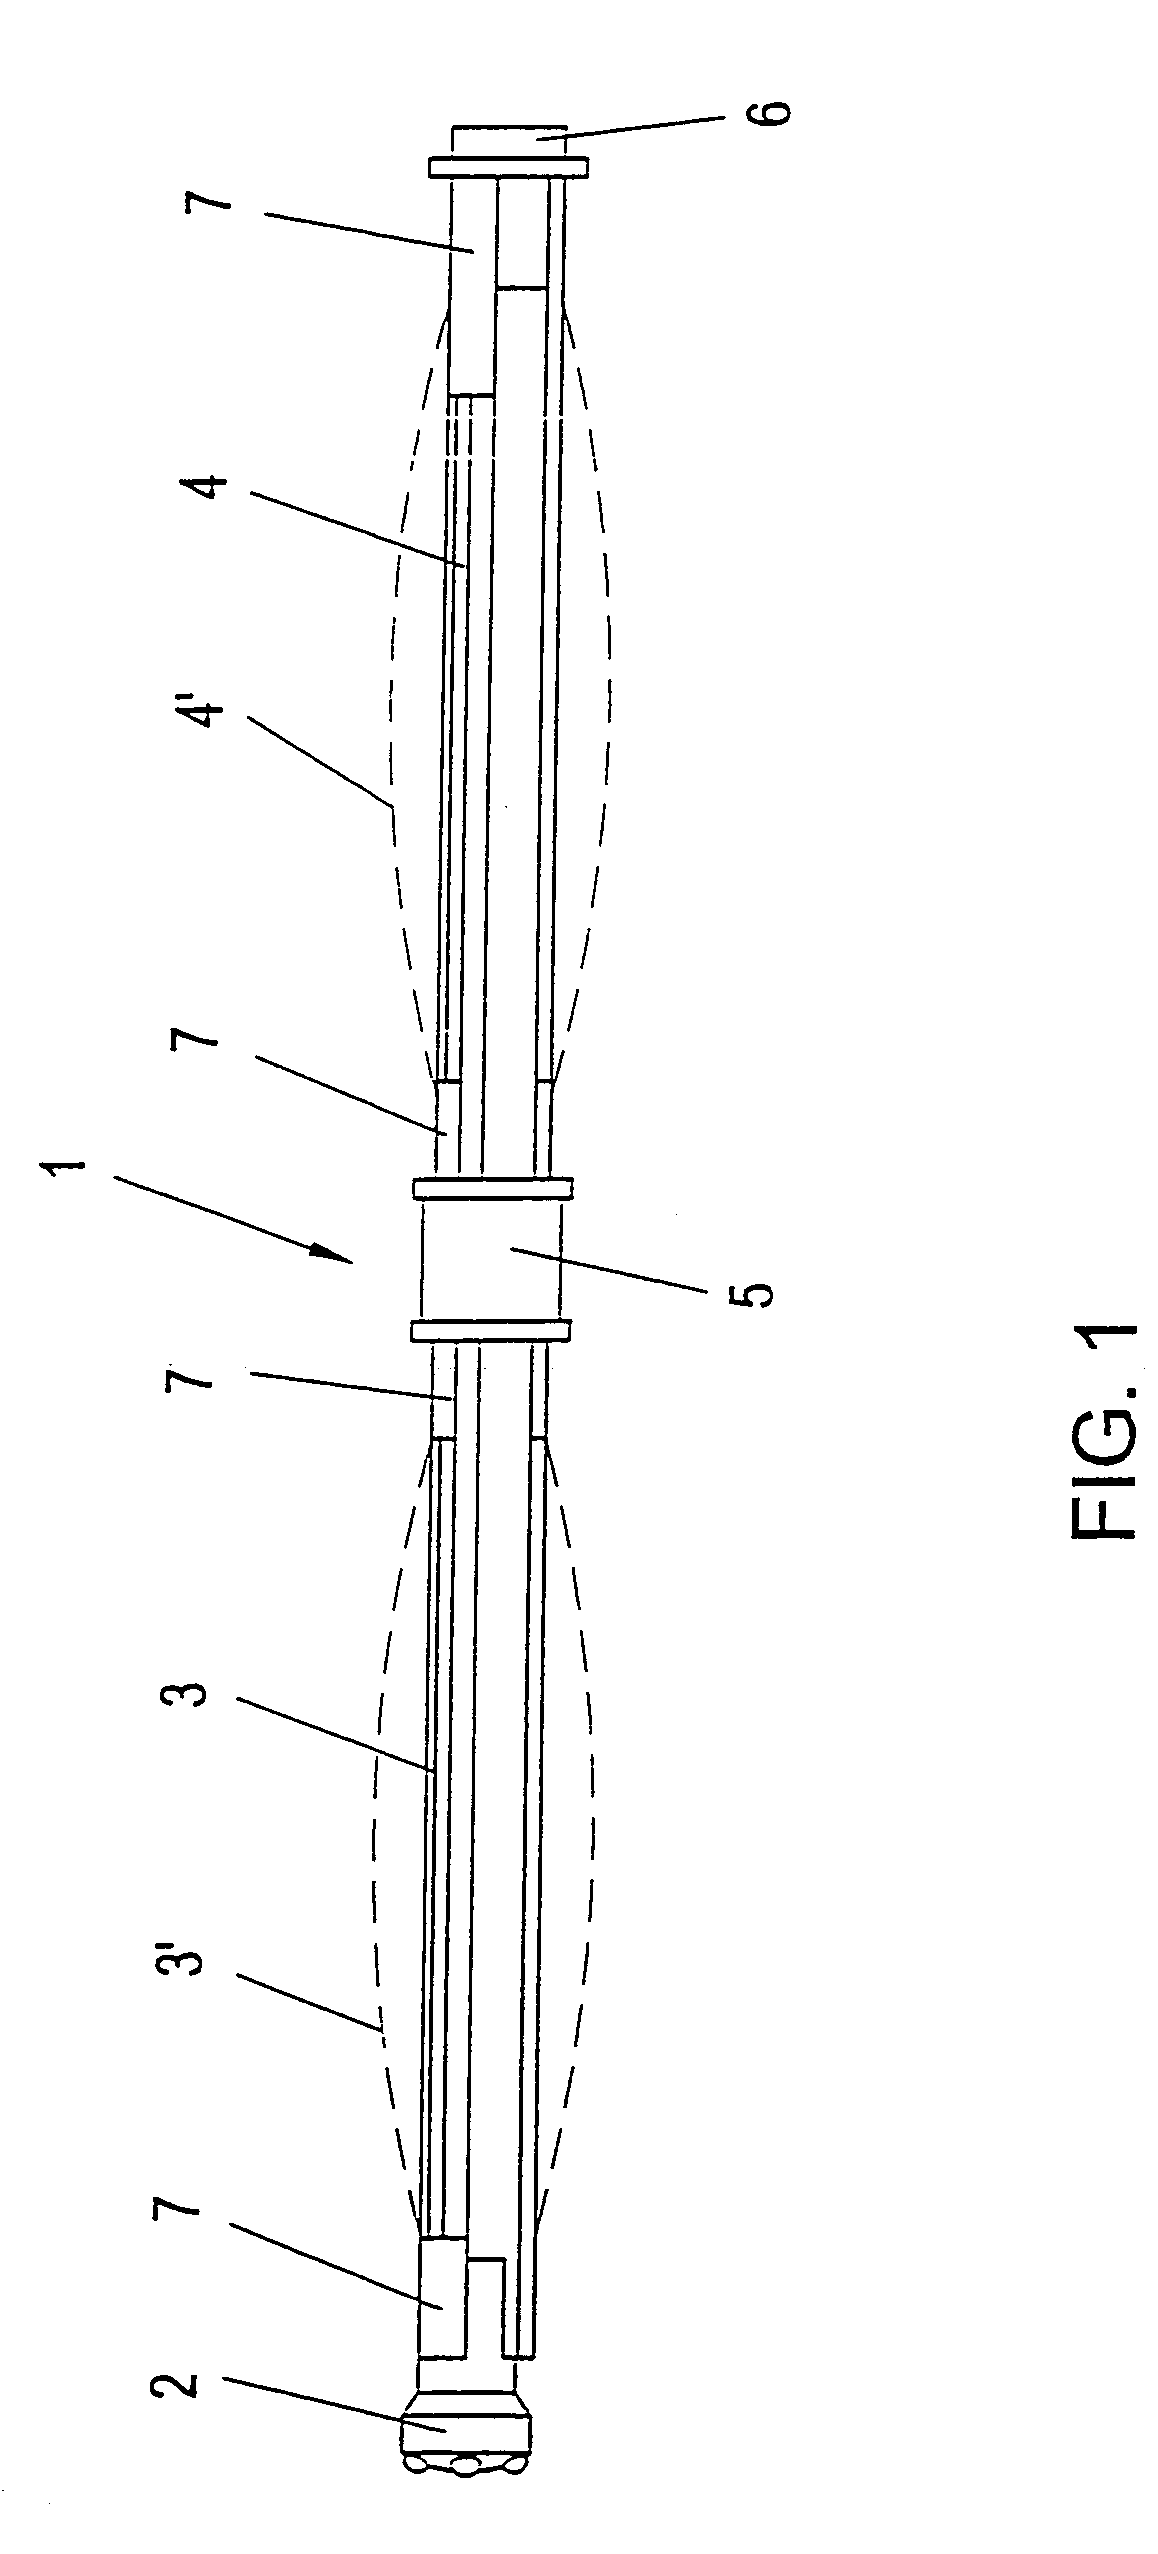 Rock bolts with expandable element